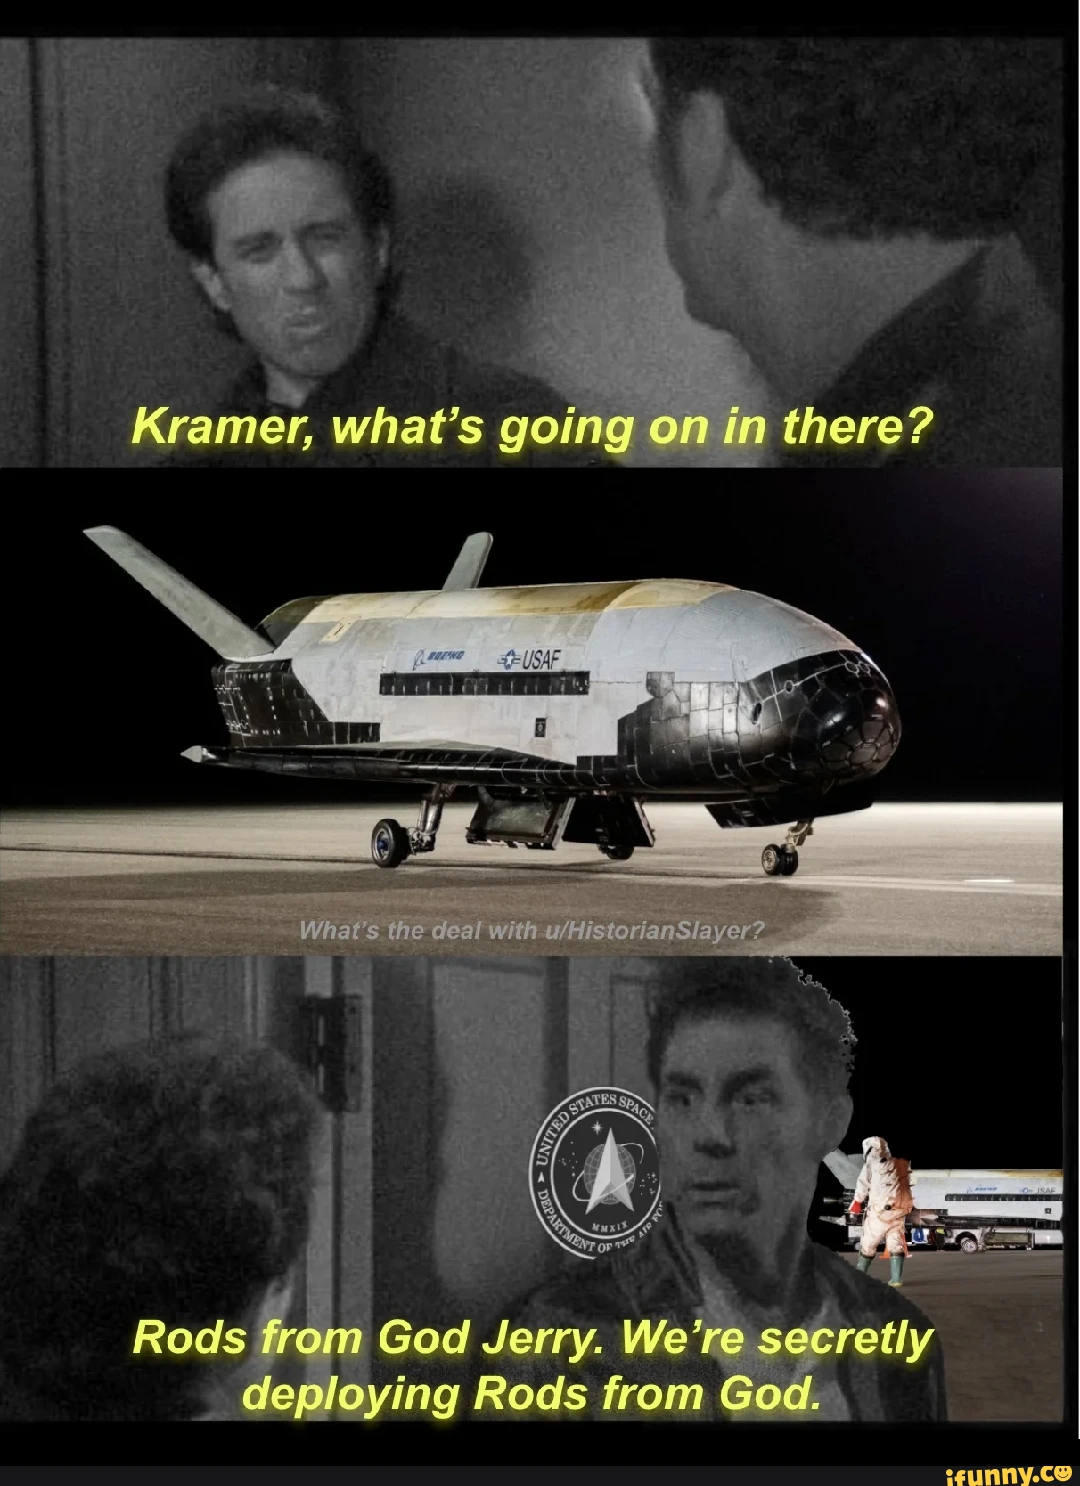 Kramer, what's going on in there? We're secretly deploying Rods from God. God.